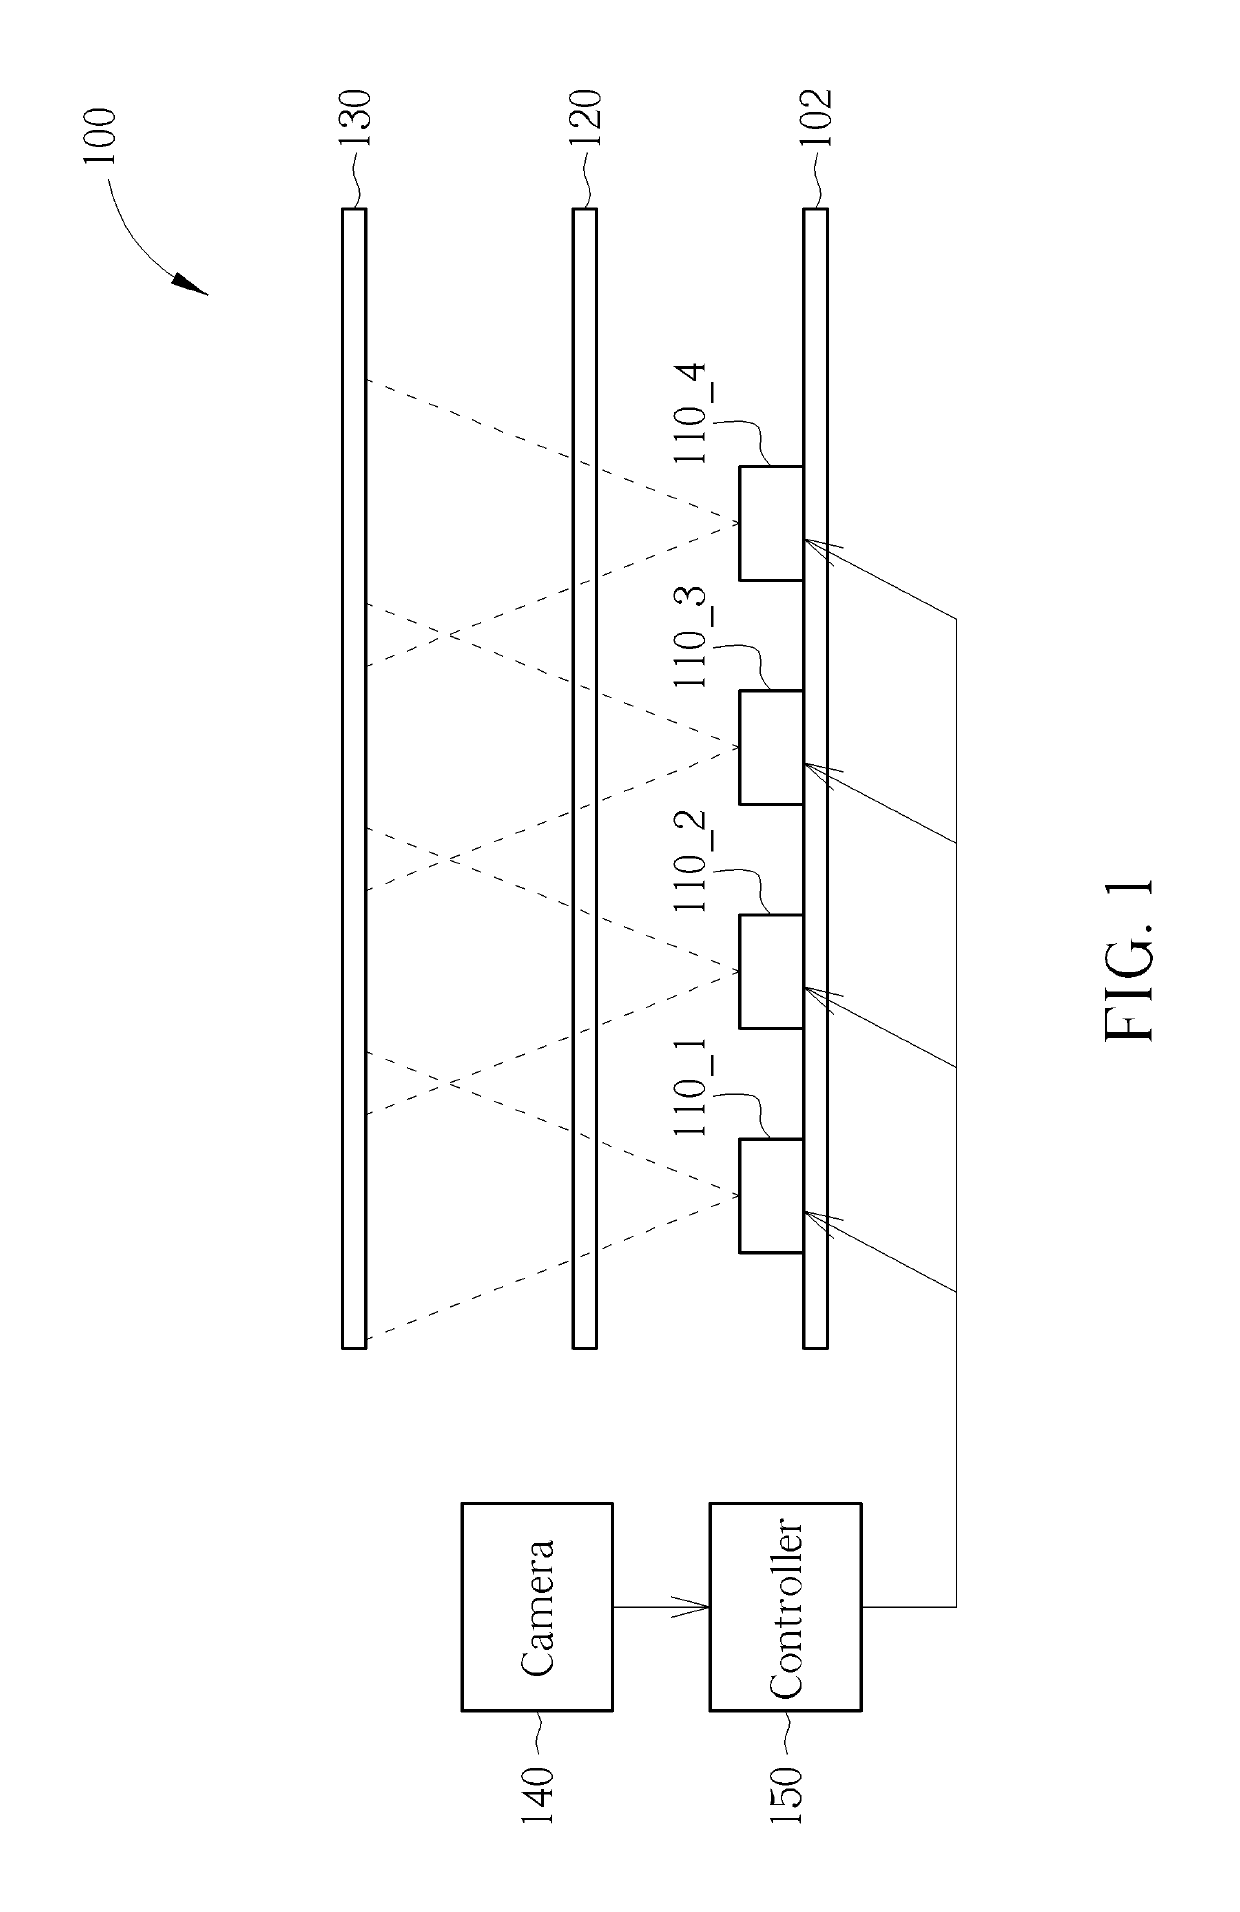 Active alignment equipment and associated method for testing a plurality of projector modules